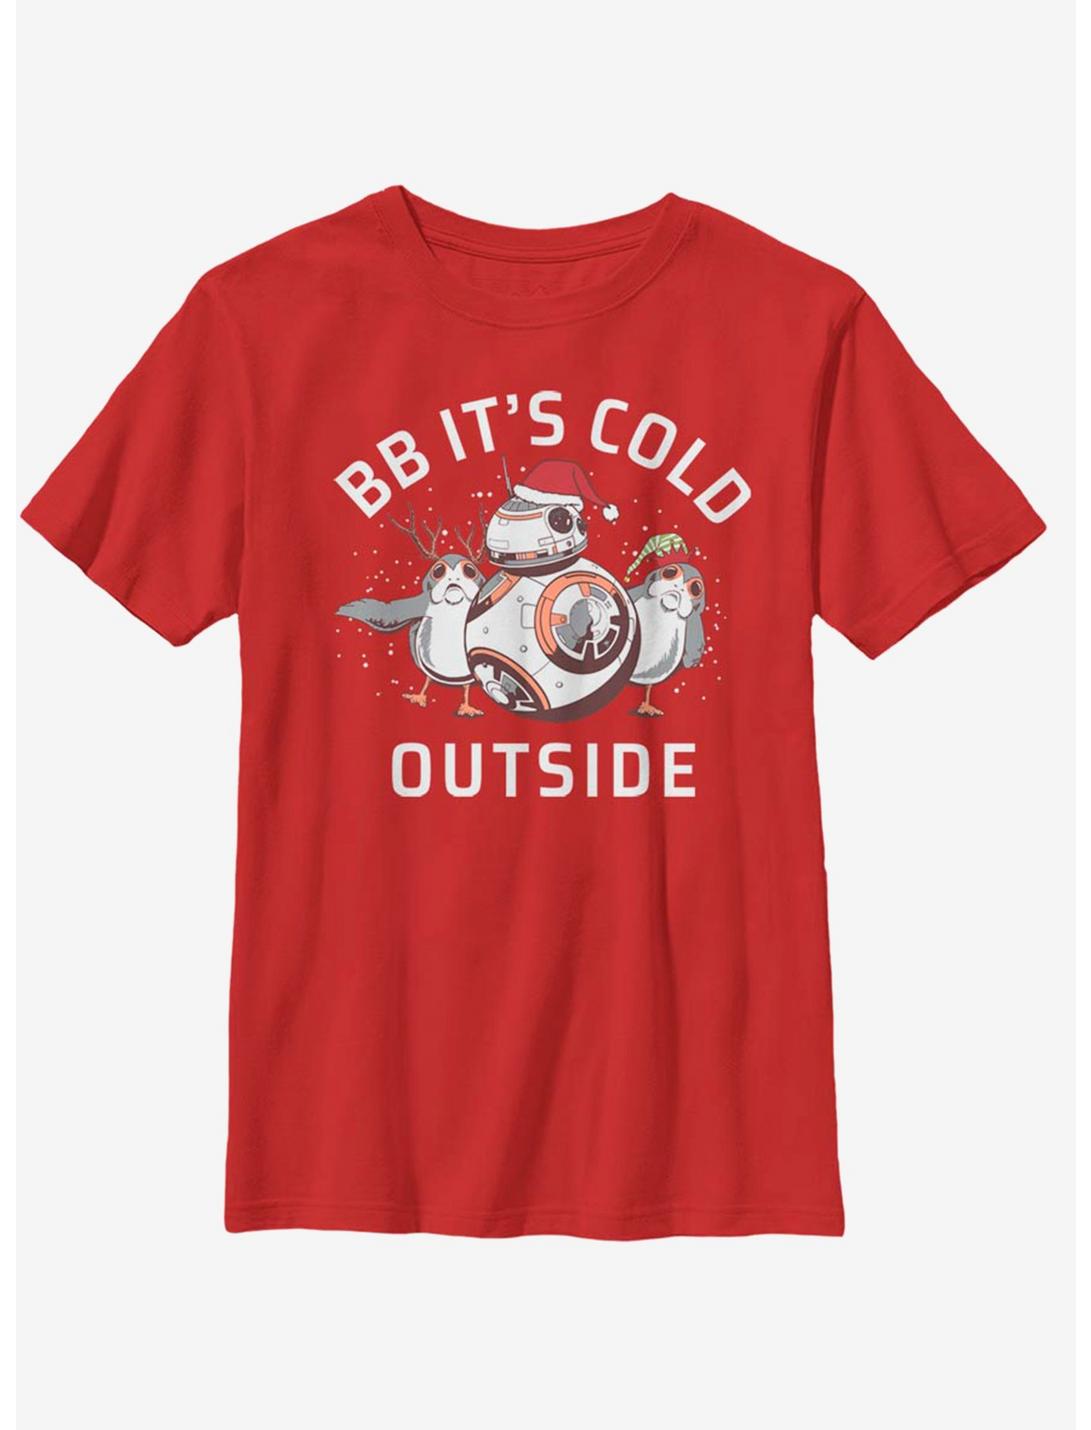 Star Wars BB It's Cold Youth T-Shirt, RED, hi-res